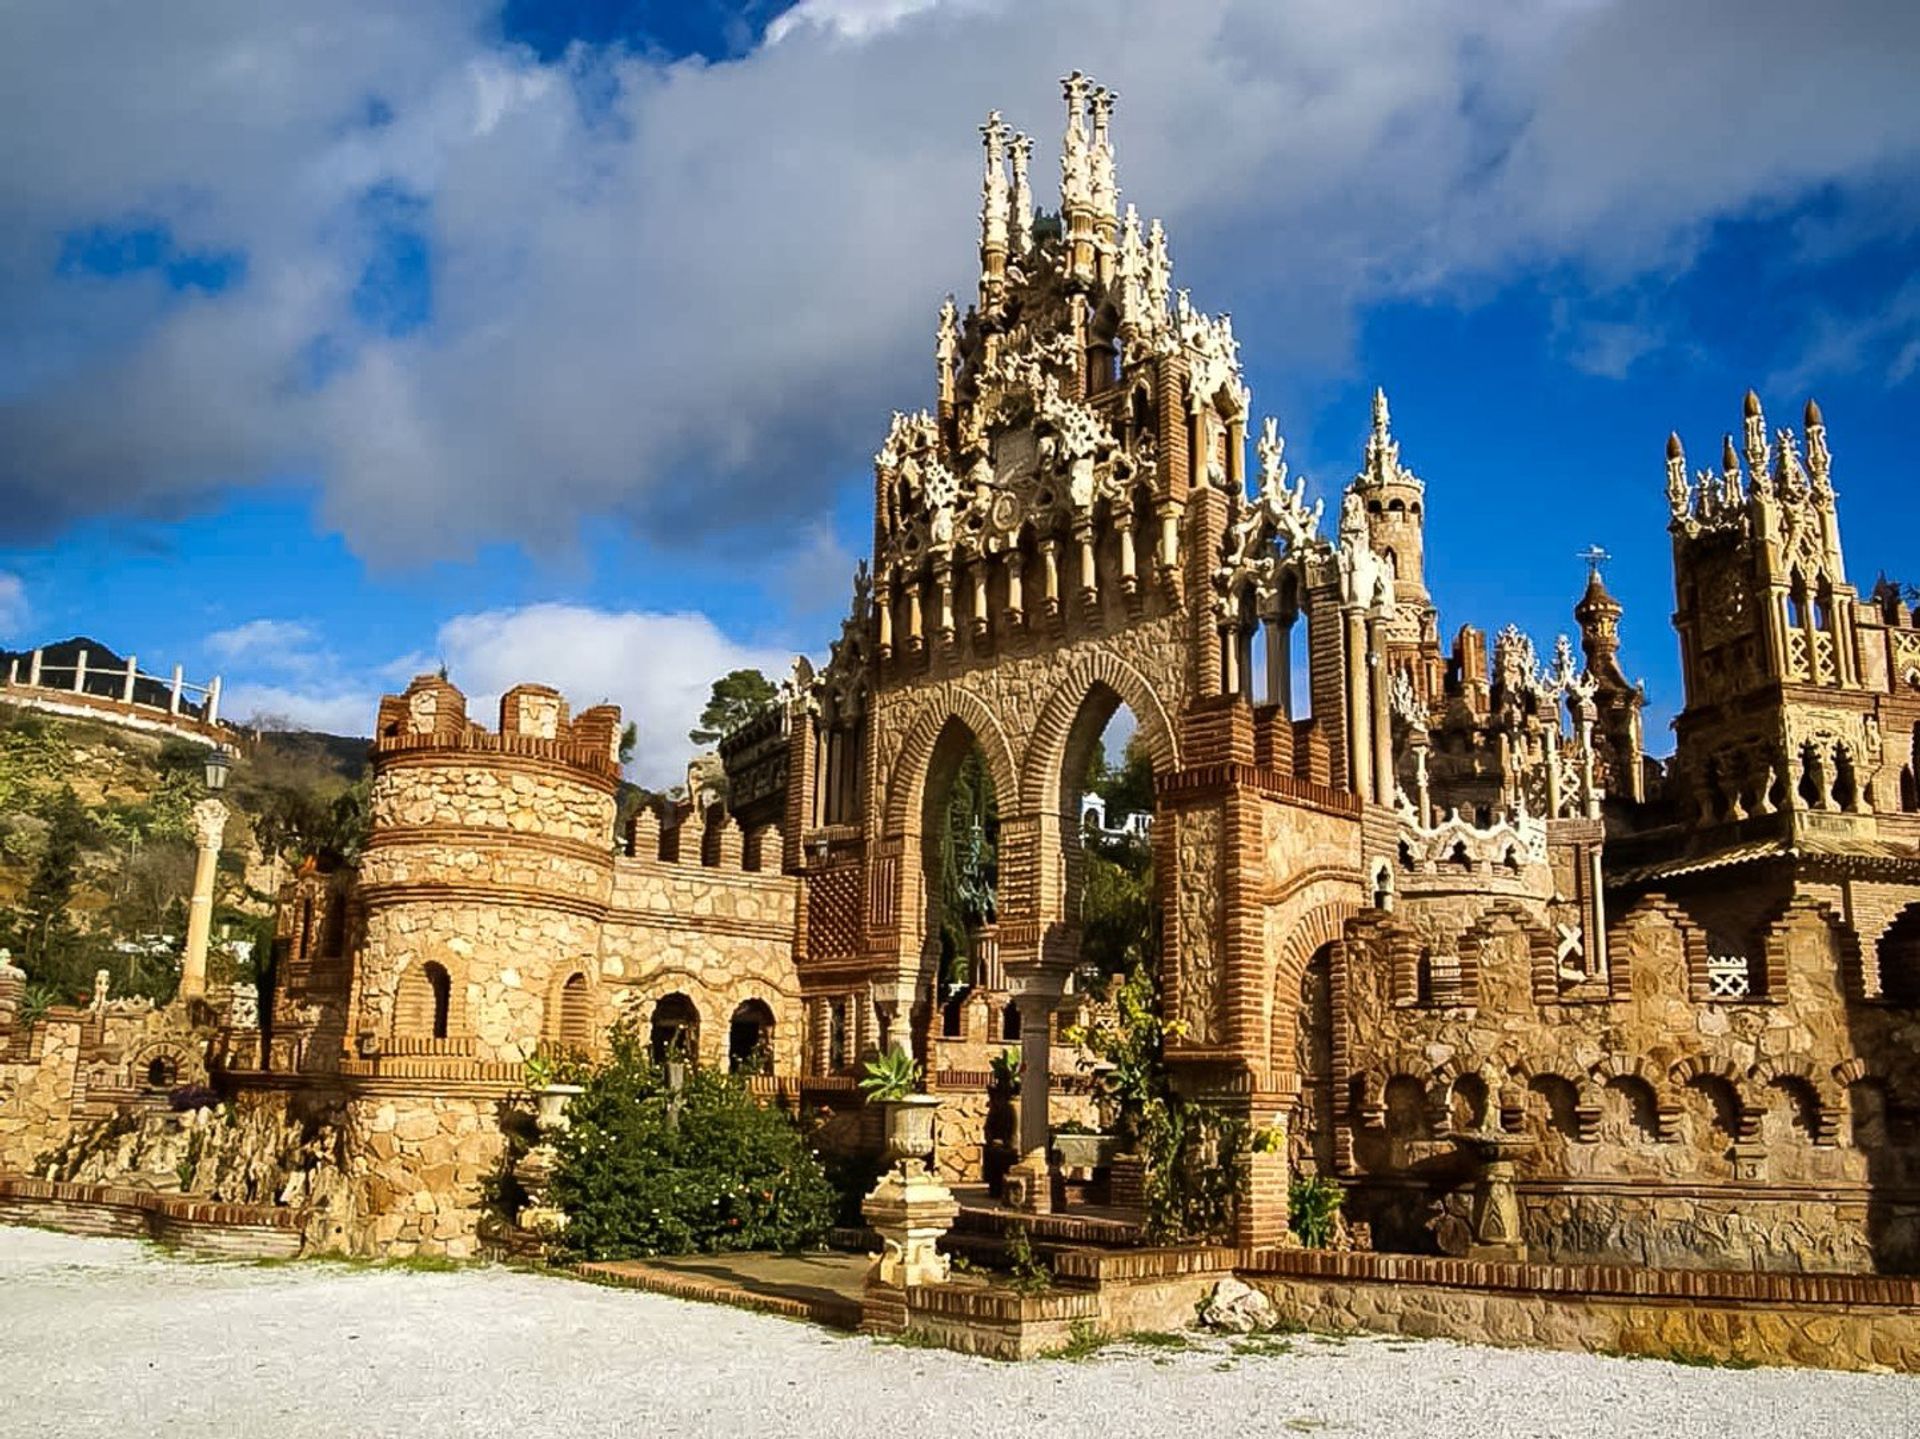 The magnificent Colomares Castle, in the heart of Benalmadena Old Village